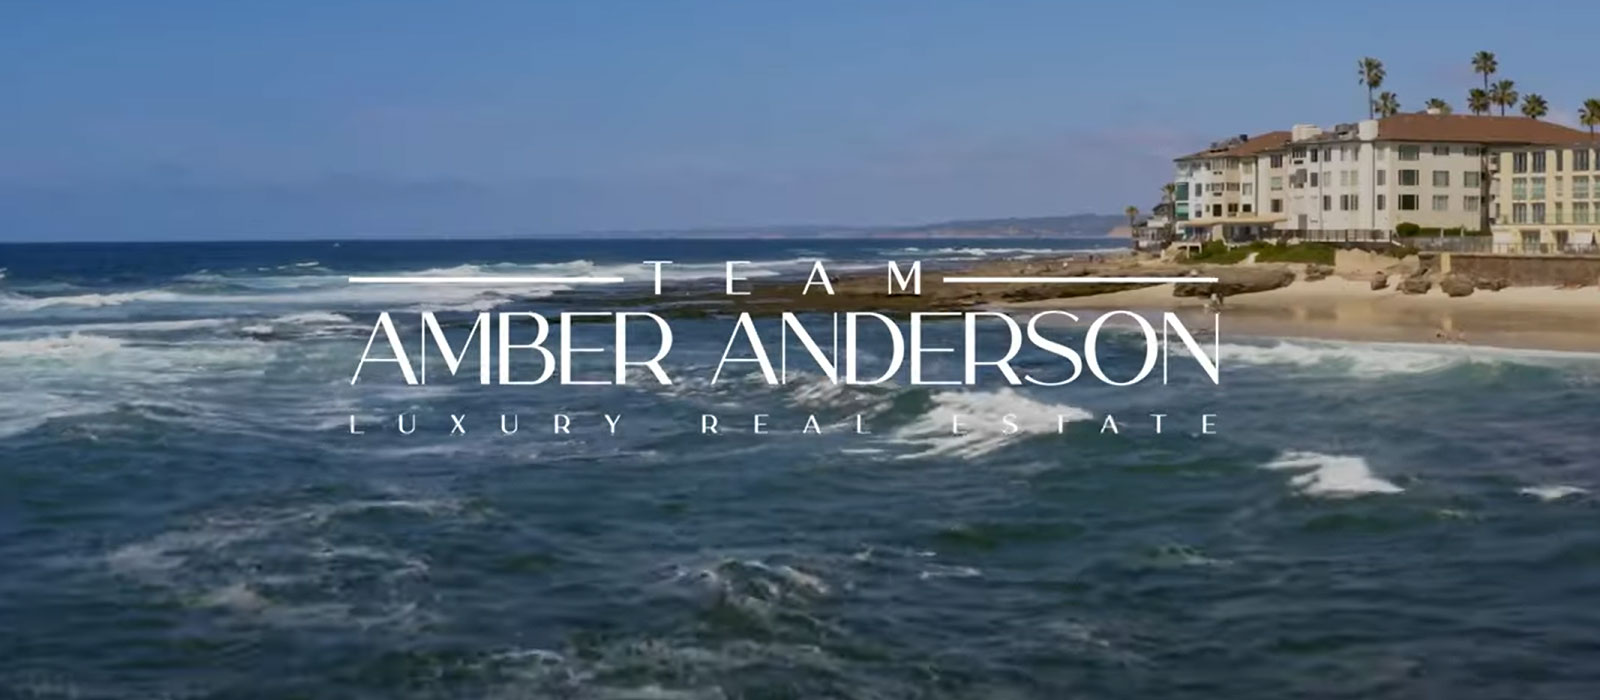 About Amber Anderson - Video